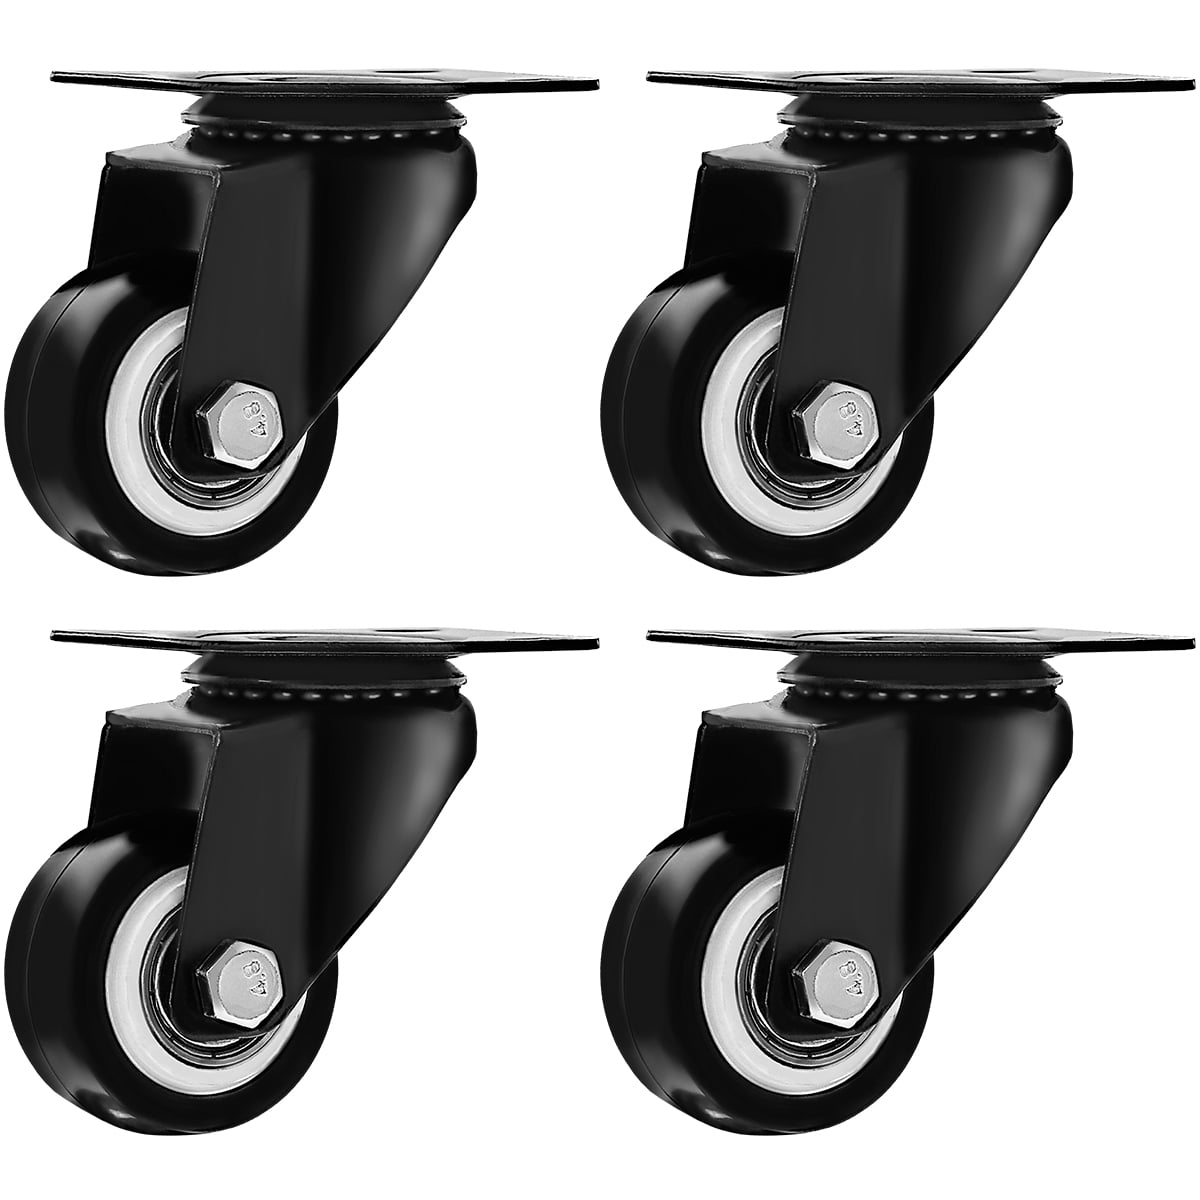 Swivel Caster Wheels Rubber Base With Top Plate & Bearing Heavy Duty Pack Of 